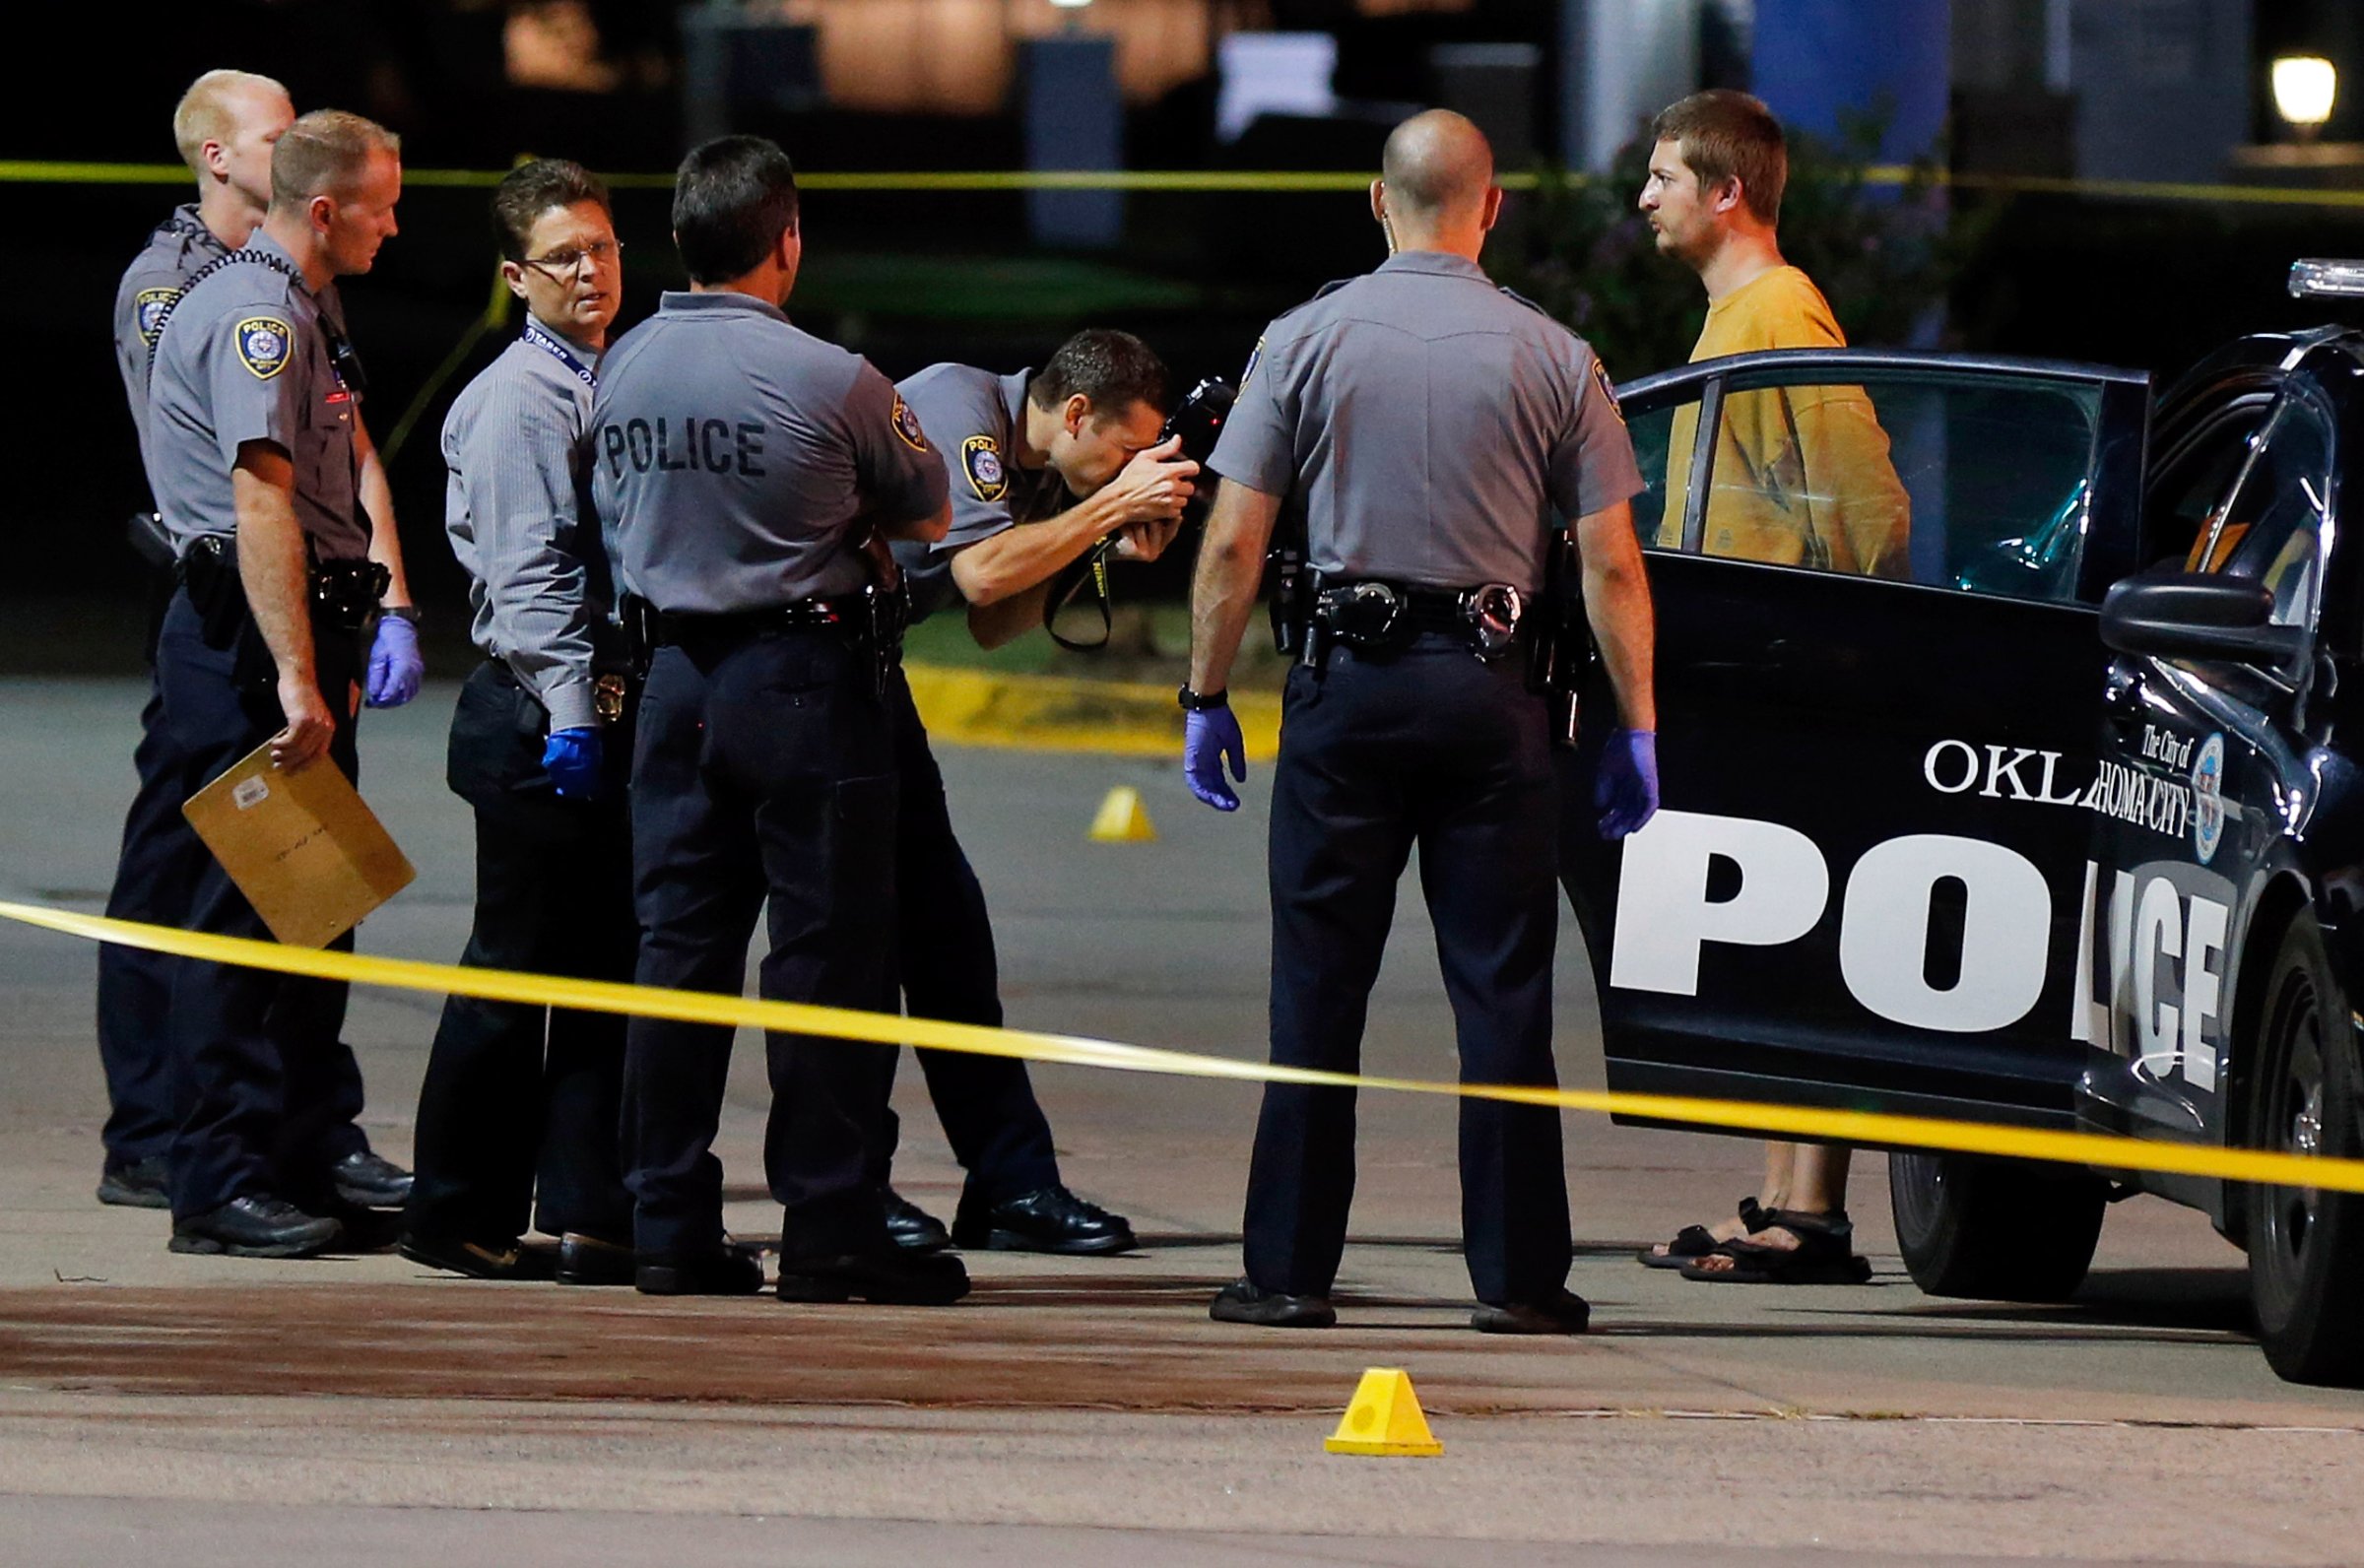 Oklahoma City police take photos of Christian Costello, son of Oklahoma Labor Commissioner Mark Costello, before placing him in a police vehicle, Sunday, Aug. 23, 2015, at the scene where Mark Costello was fatally stabbed in Oklahoma City. Christian Costello was arrested on a first-degree murder complaint, police said. (Nate Billings/The Oklahoman via AP) LOCAL STATIONS OUT (KFOR, KOCO, KWTV, KOKH, KAUT OUT); LOCAL WEBSITES OUT; LOCAL PRINT OUT (EDMOND SUN OUT, OKLAHOMA GAZETTE OUT) TABLOIDS OUT; MANDATORY CREDIT